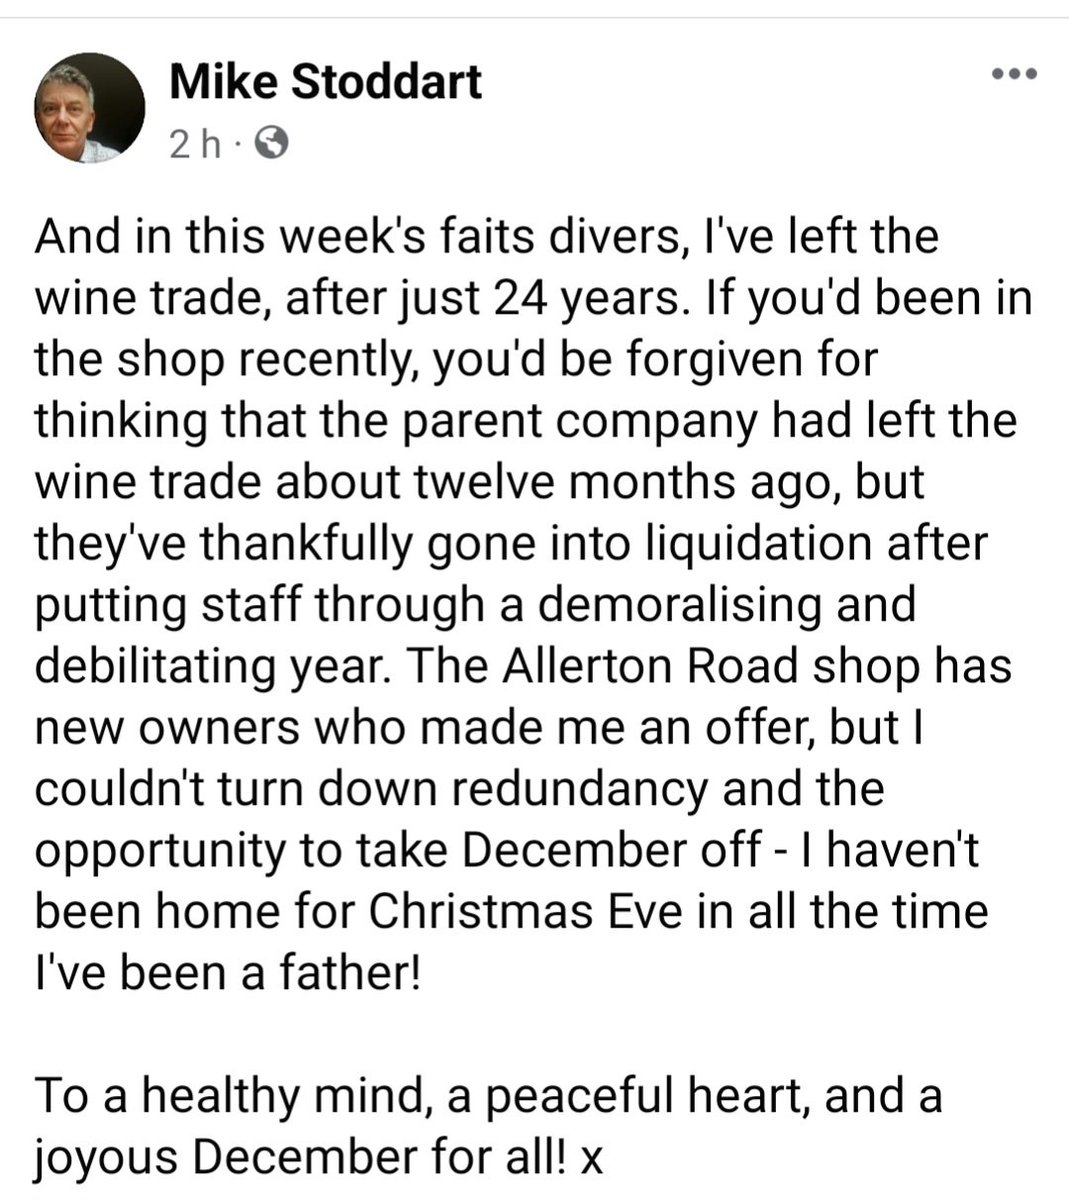 I've left the wine trade after 24 years. I can't fit much into a tweet so here's my FB post. But thanks to all of you who've been so supportive throughout that time, too many to list but you know who you are! @angiesliverpool @jeffyoungwriter @bernieworld @korkymaster @matt_77r